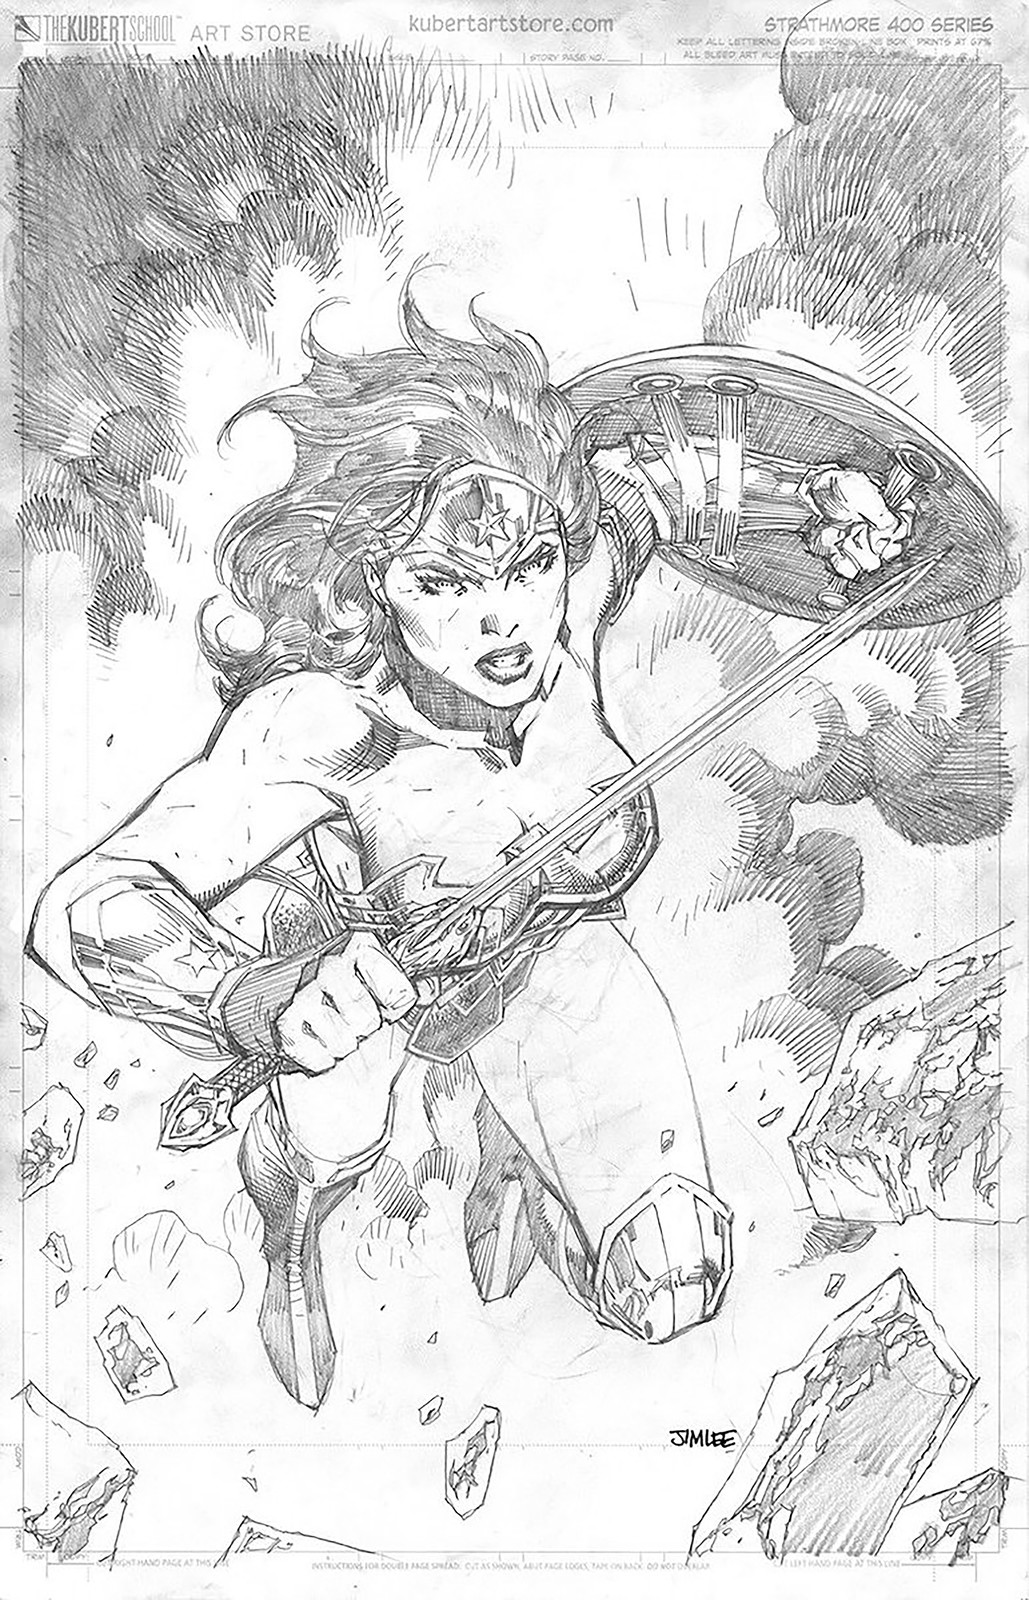 Pencil by Jim Lee, The Maestro.